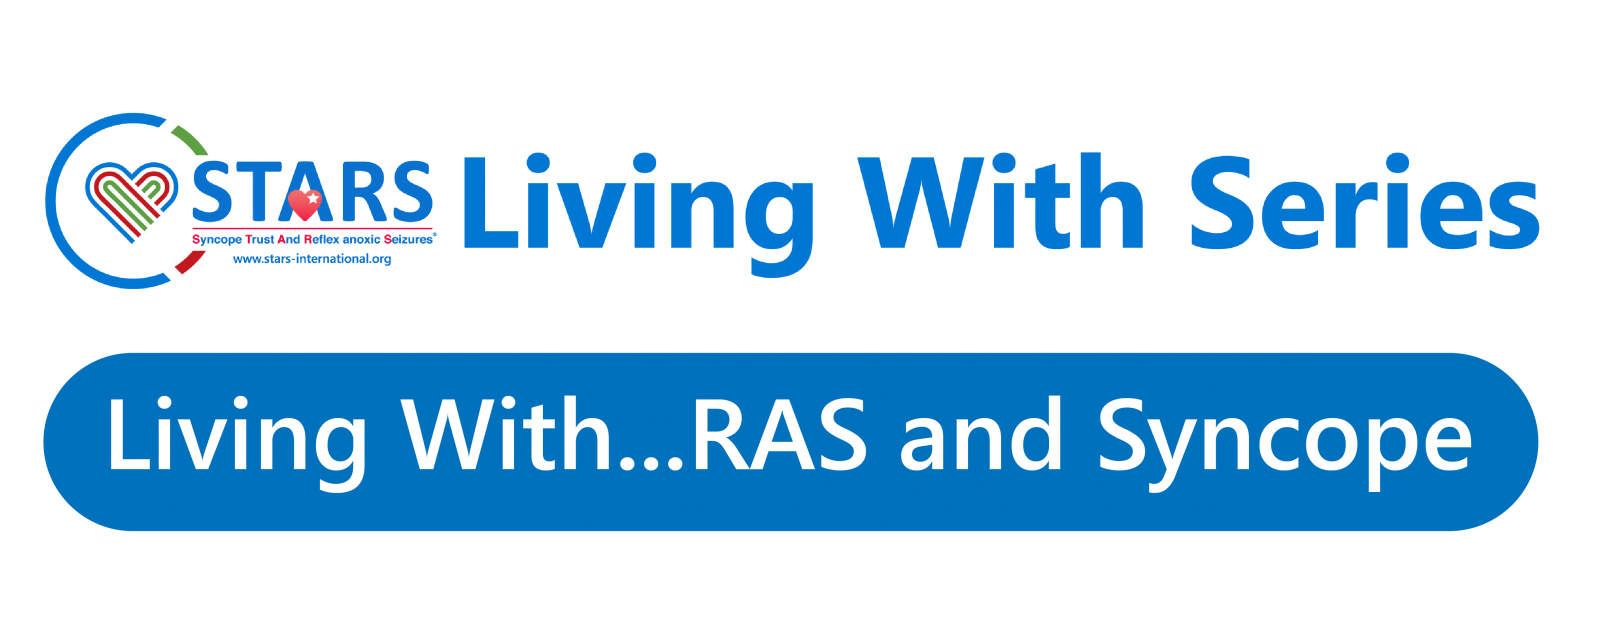 Living with... RAS and Syncope